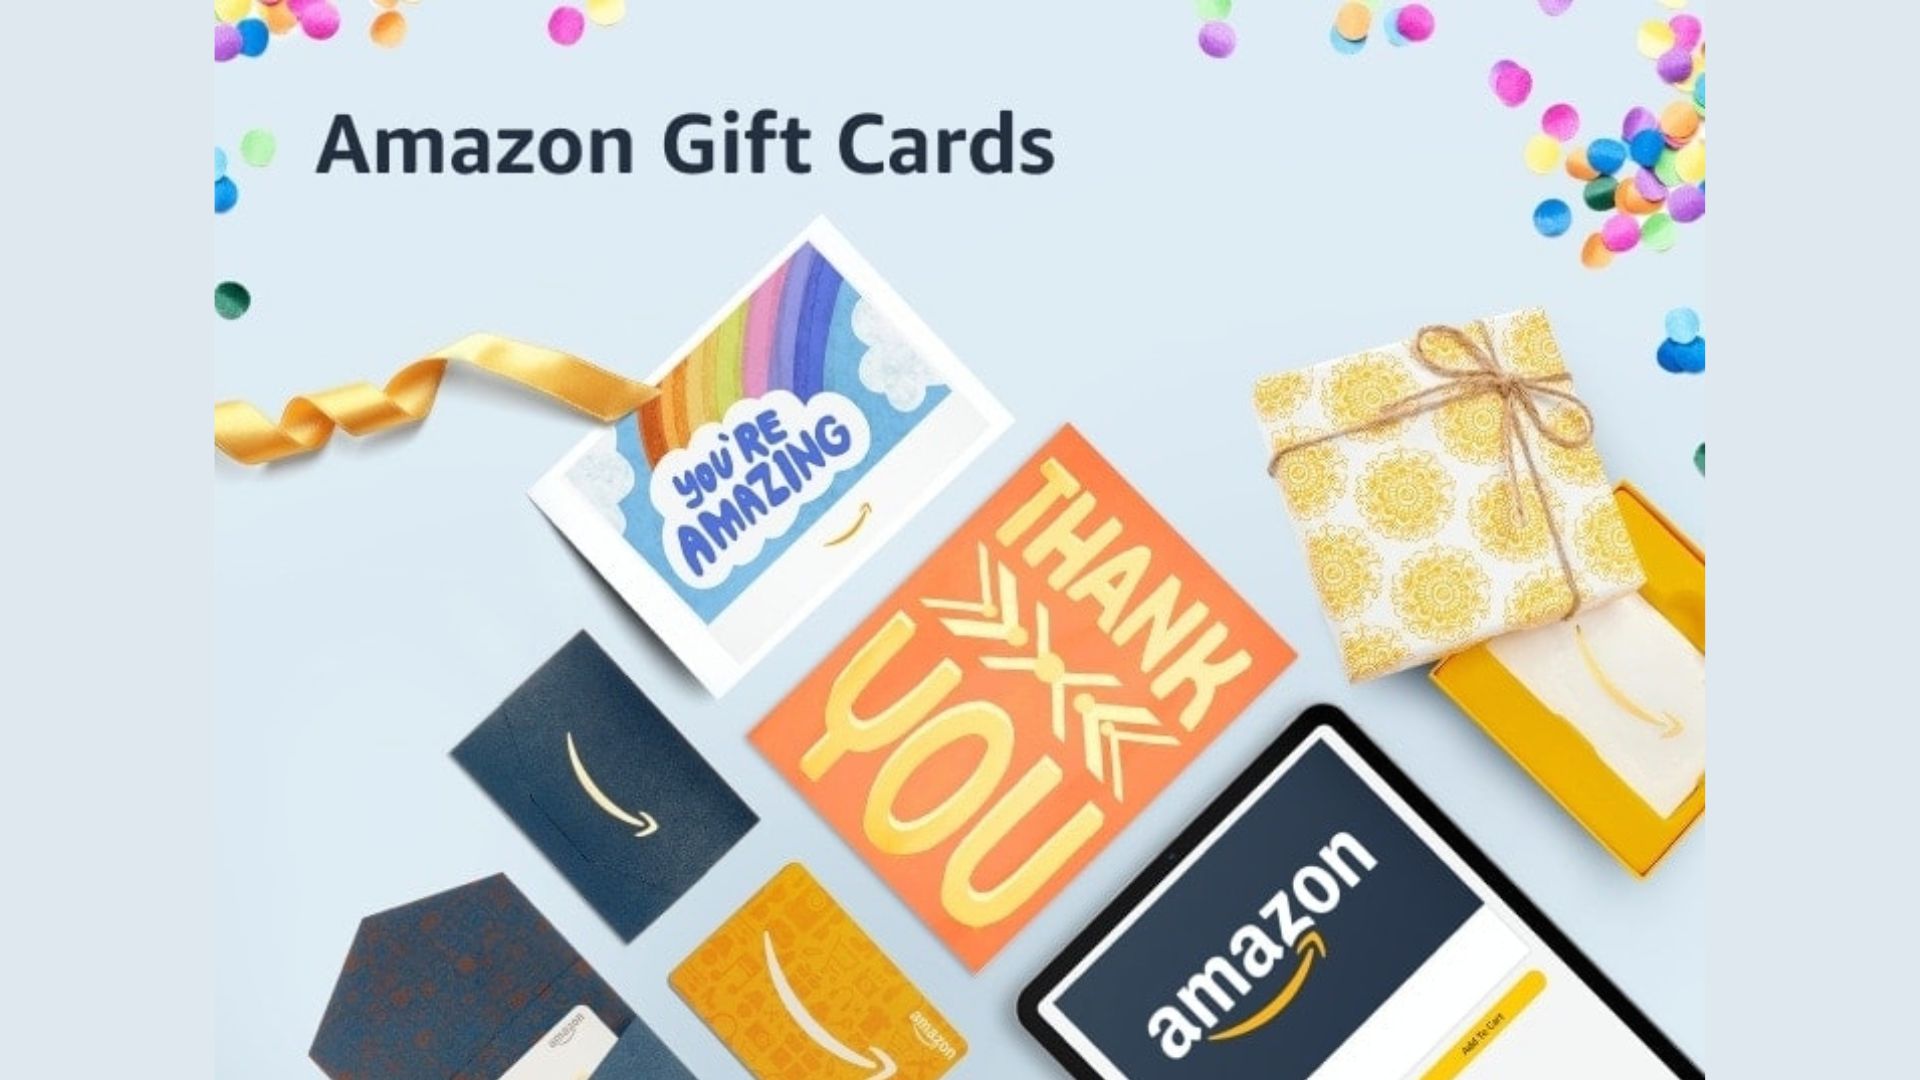 How to redeem an Amazon gift card - Android Authority